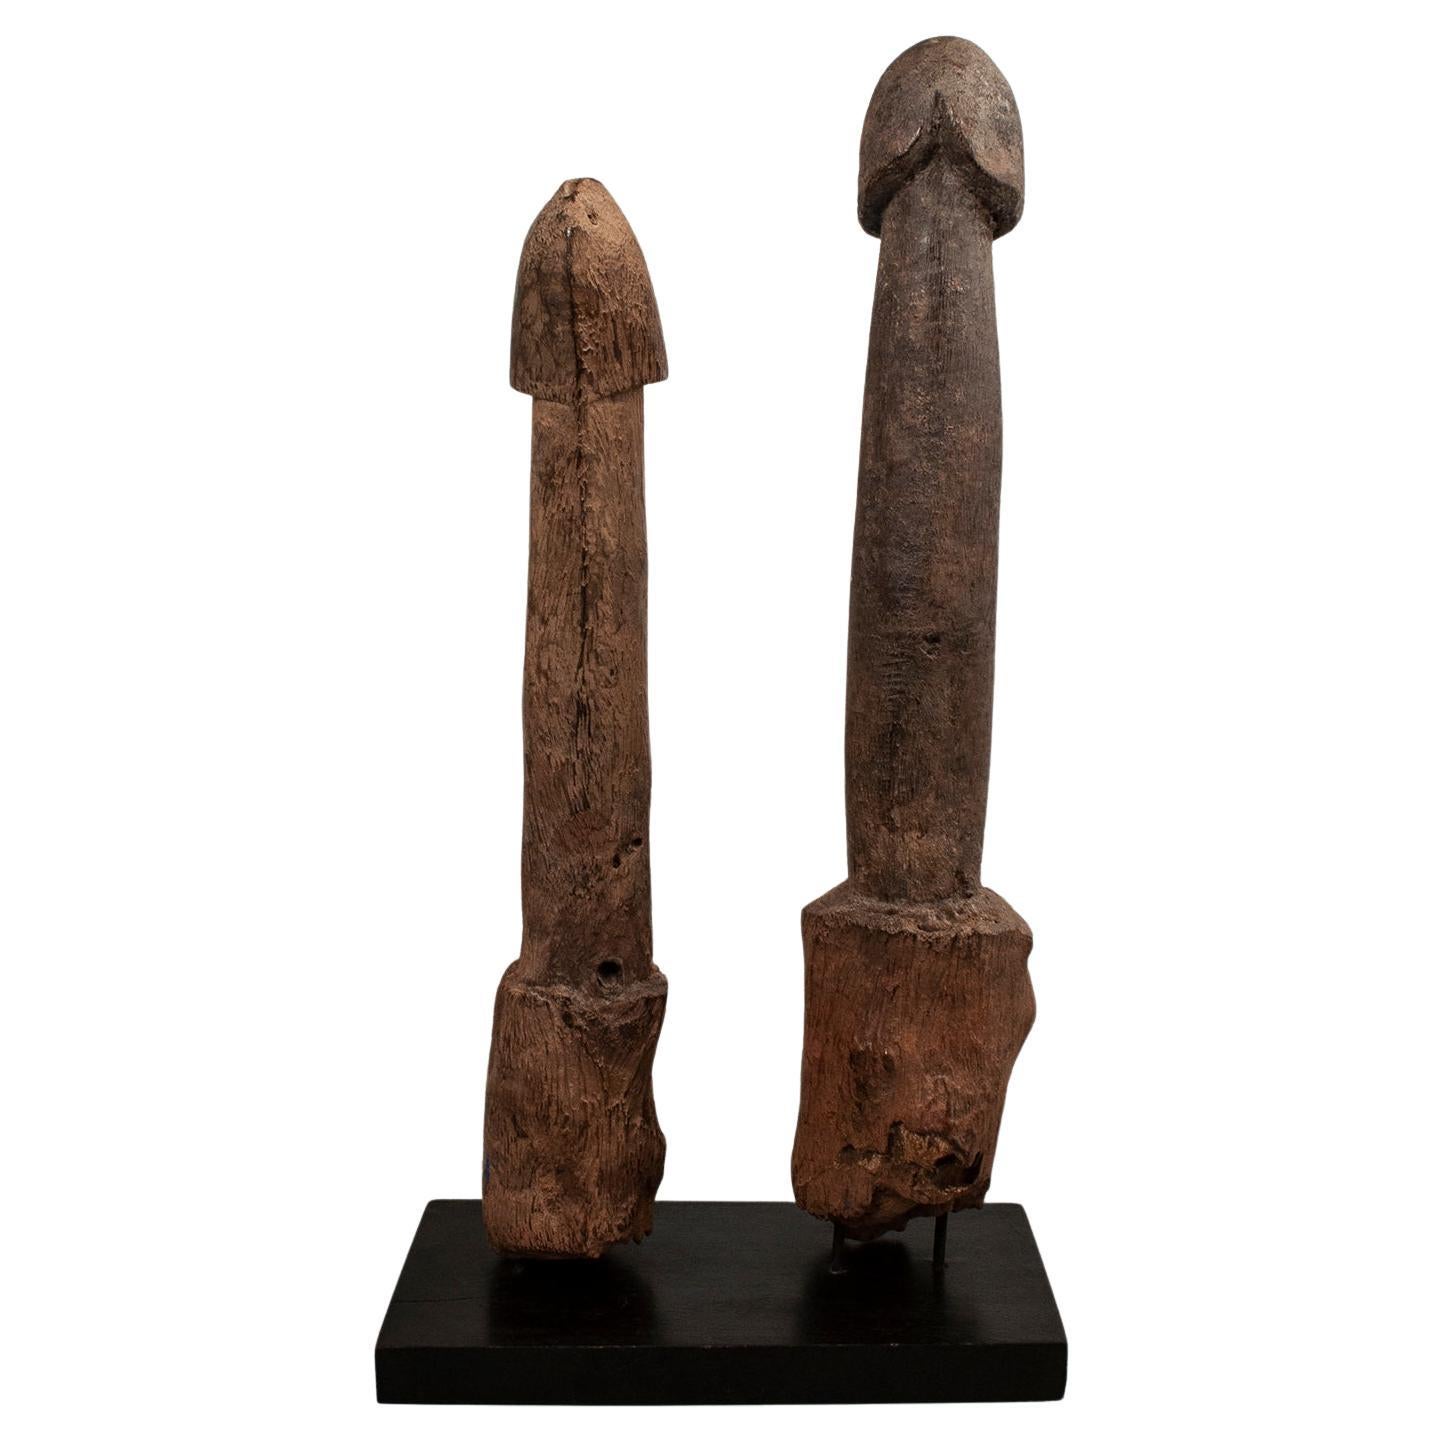 Two Late 19th-Early 20th Century Wood Legba Phalluses, Fon People, West Africa